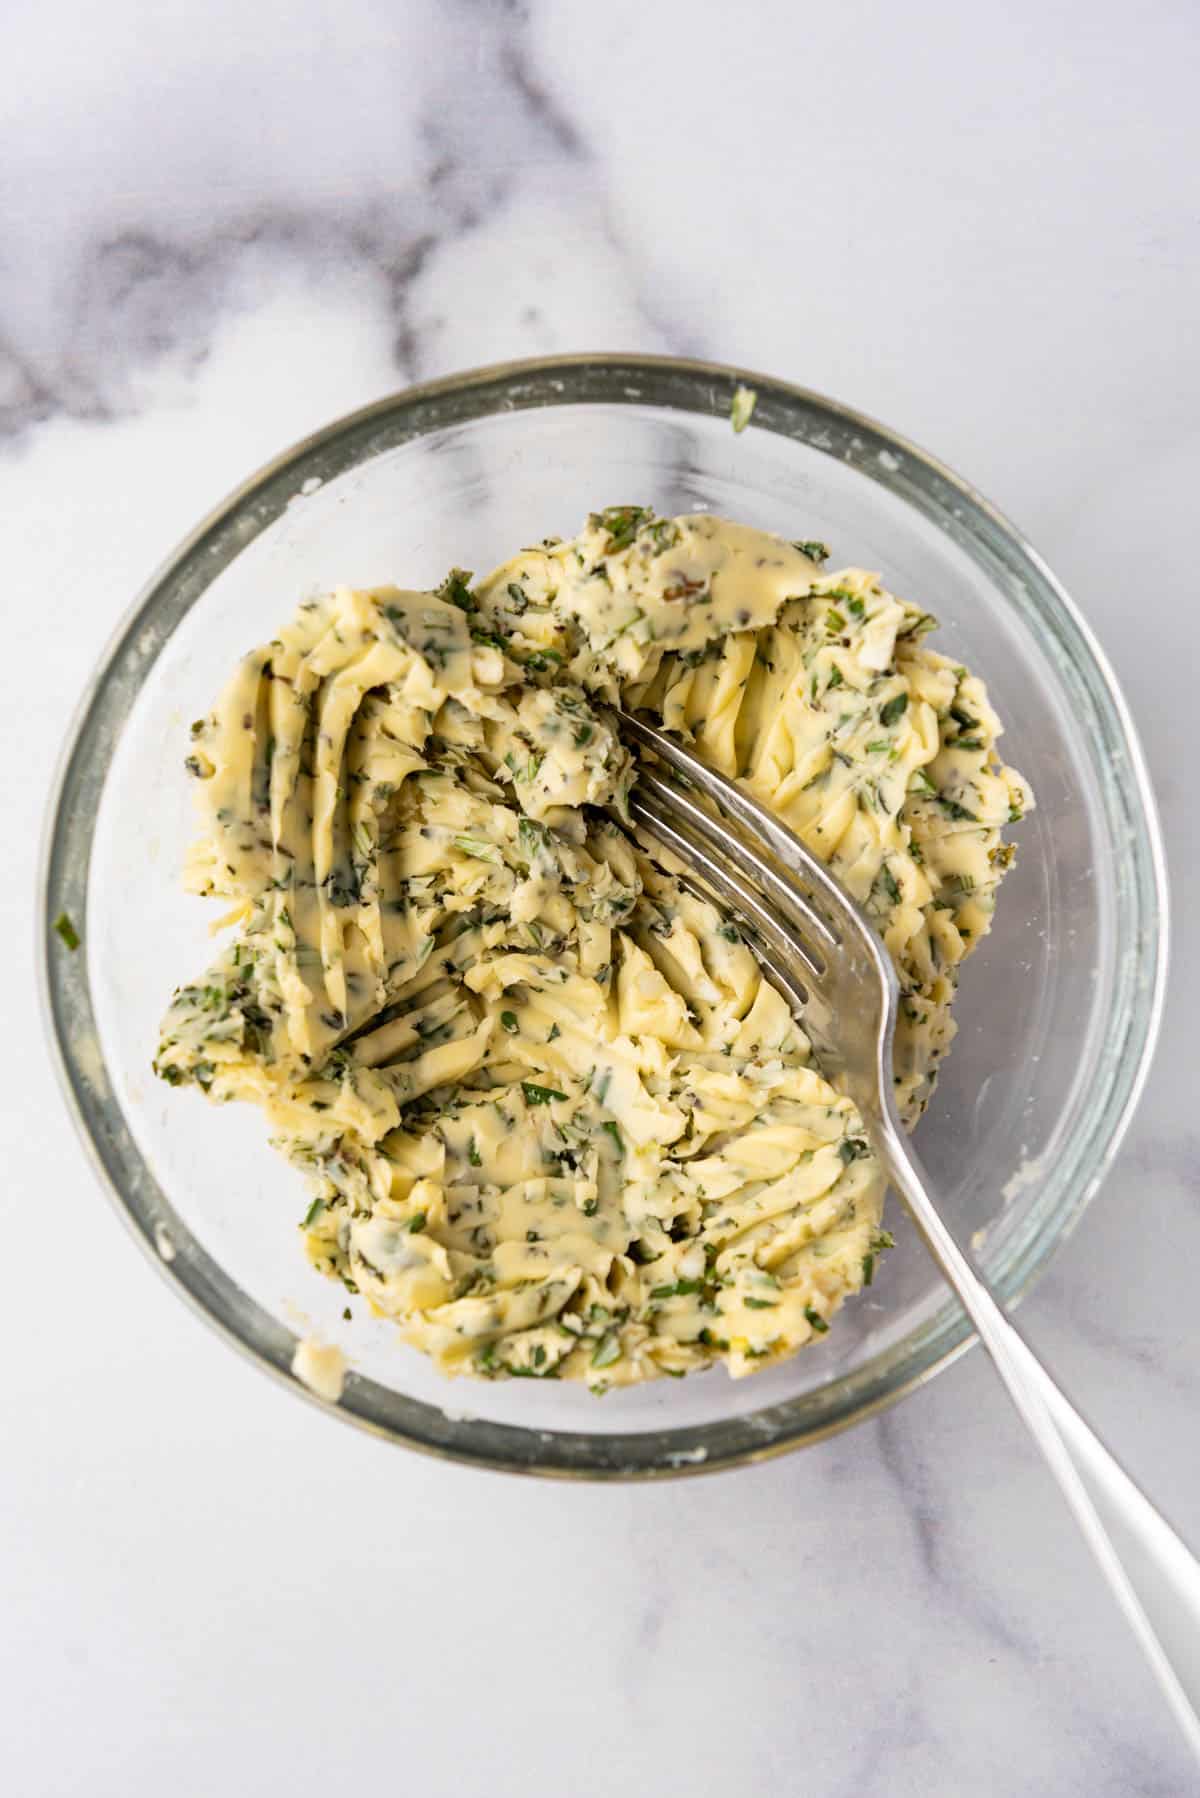 Mashed garlic  herb butter in a bowl with a fork.